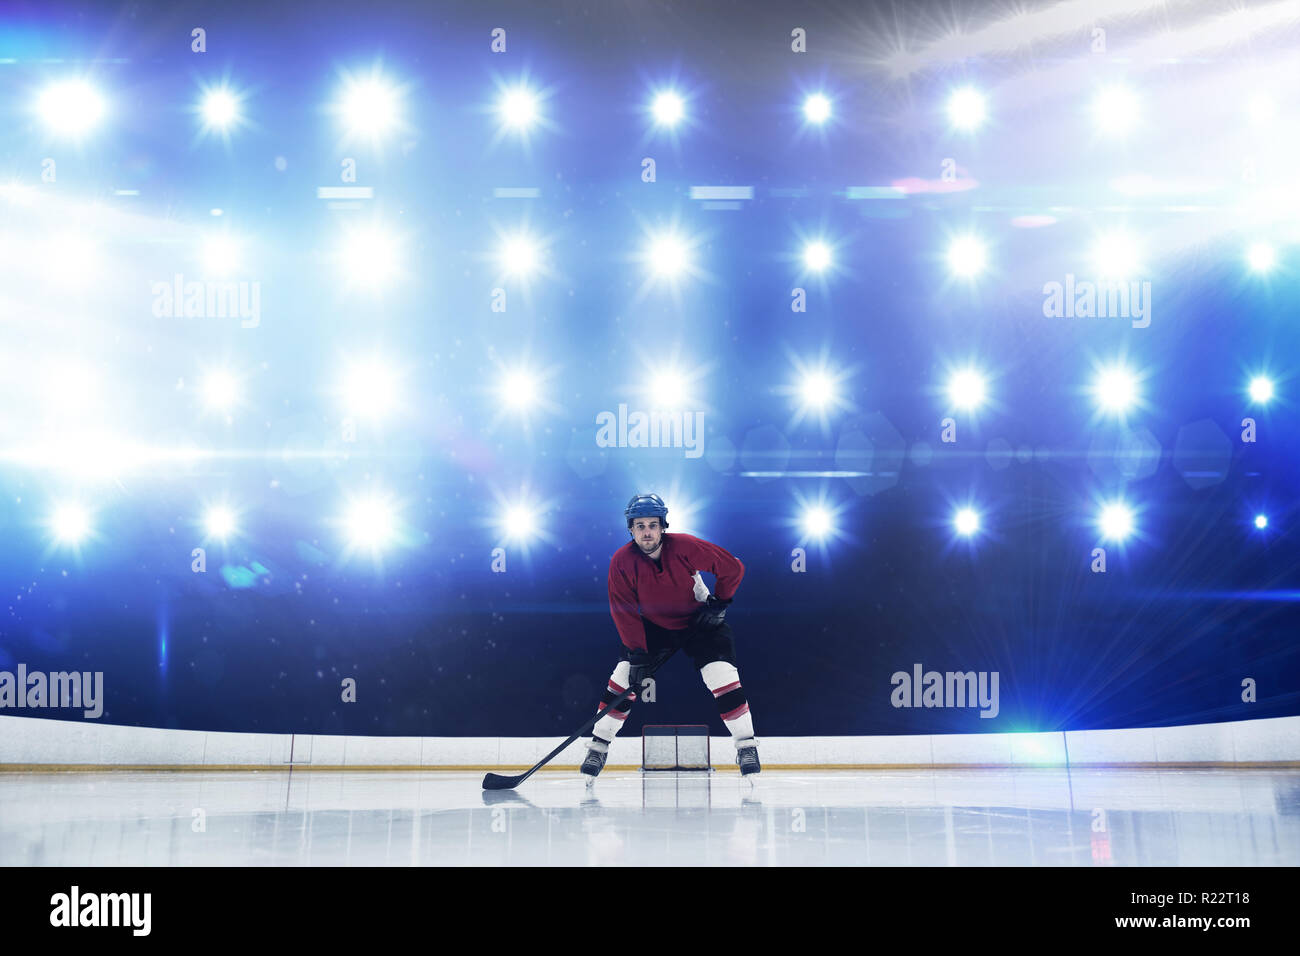 Composite image of player playing ice hockey Stock Photo